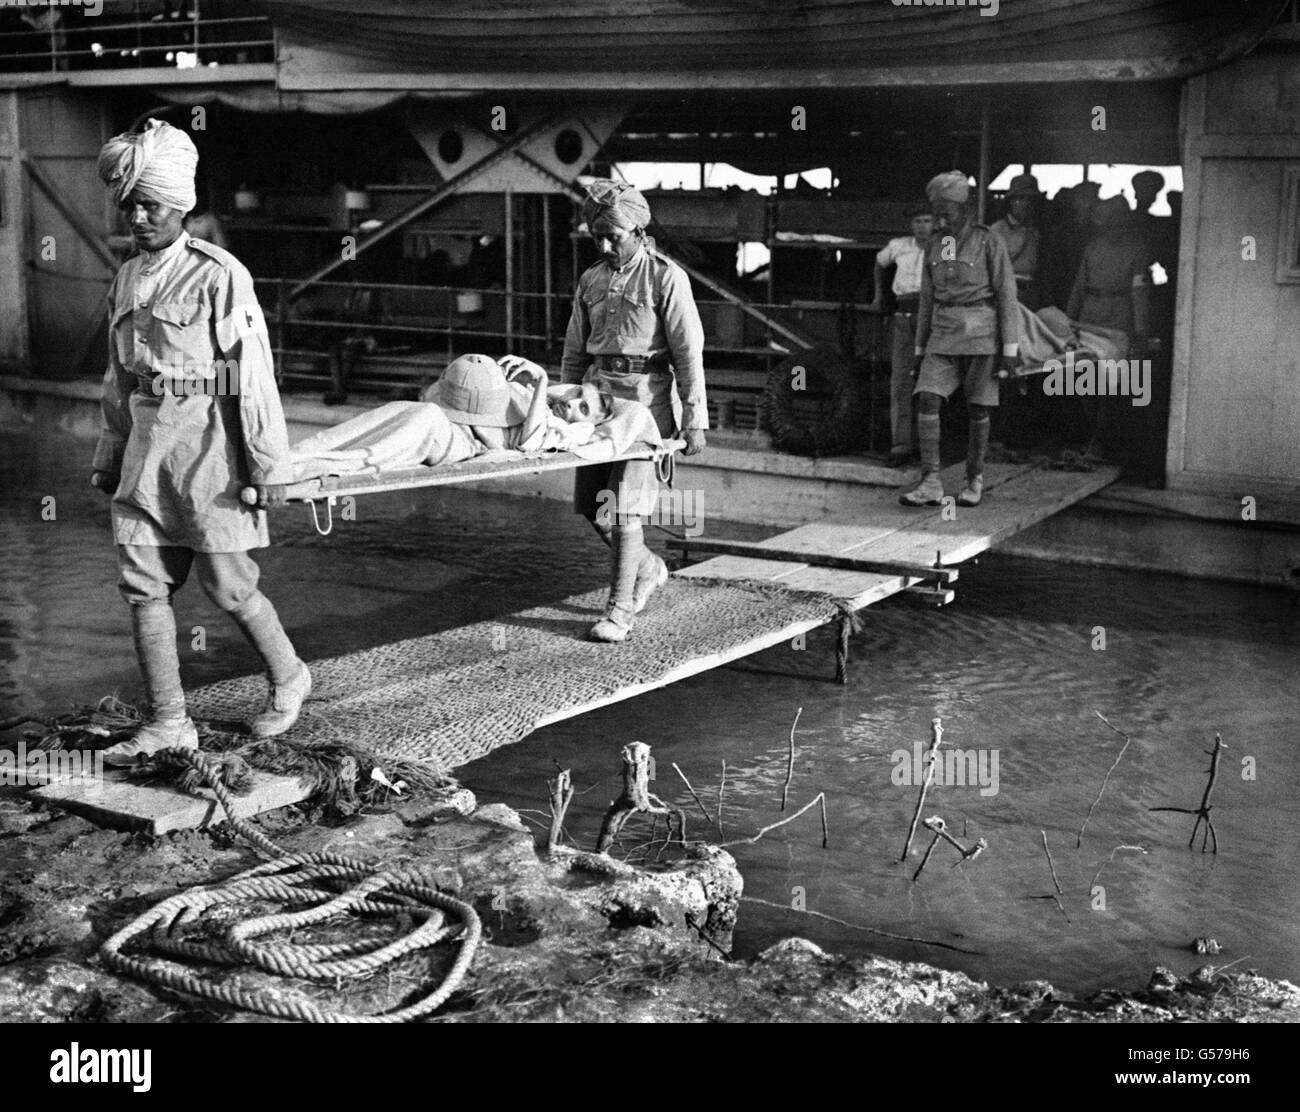 A British casualty being brought down the gangway from a steamer by Indian Army orderlies at Falariyeh, Mesopotamia. The Indian Expeditionary Force, consisting of both British and Indian units, advanced along the Tigris towards Baghdad in Summer 1915. Stock Photo